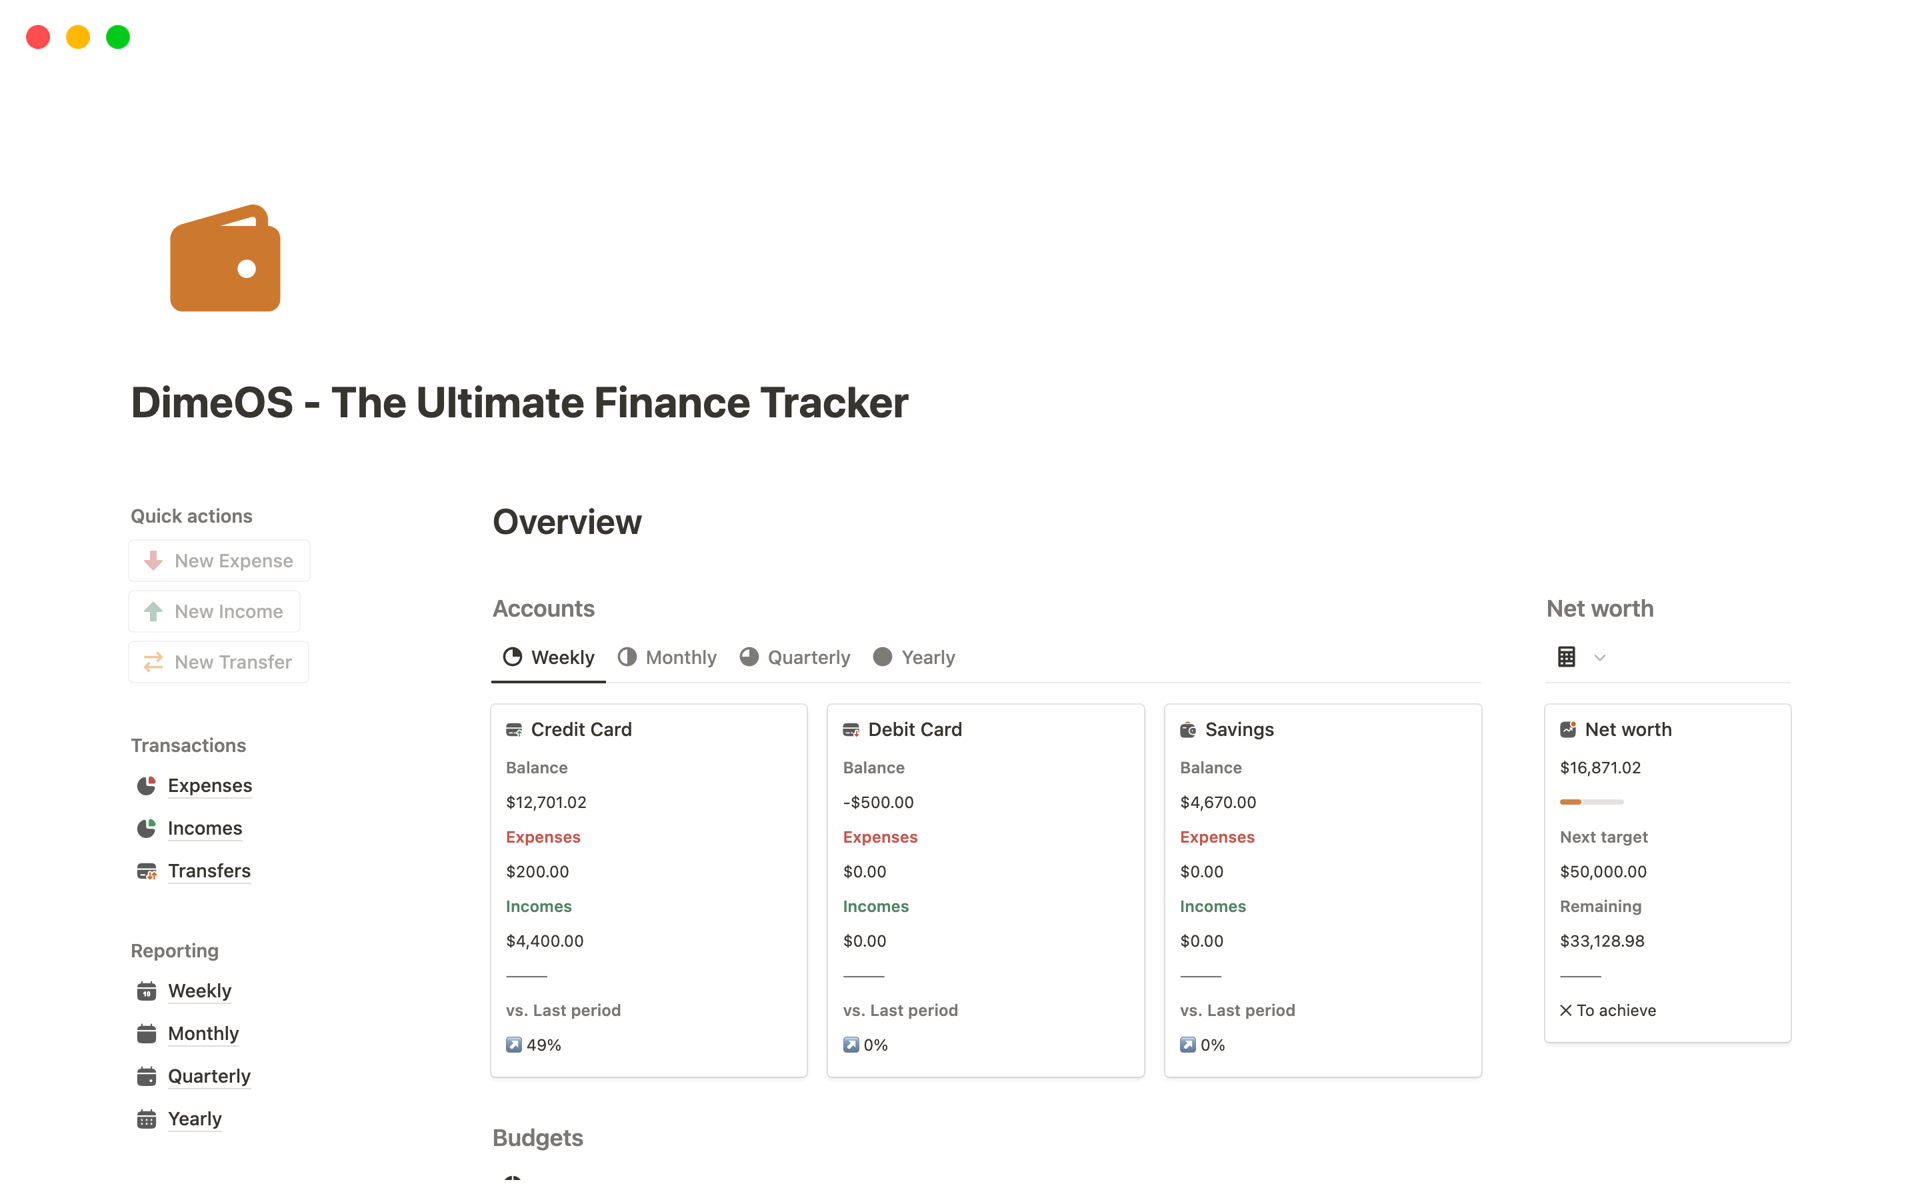 DimeOS is not just another finance tracker.